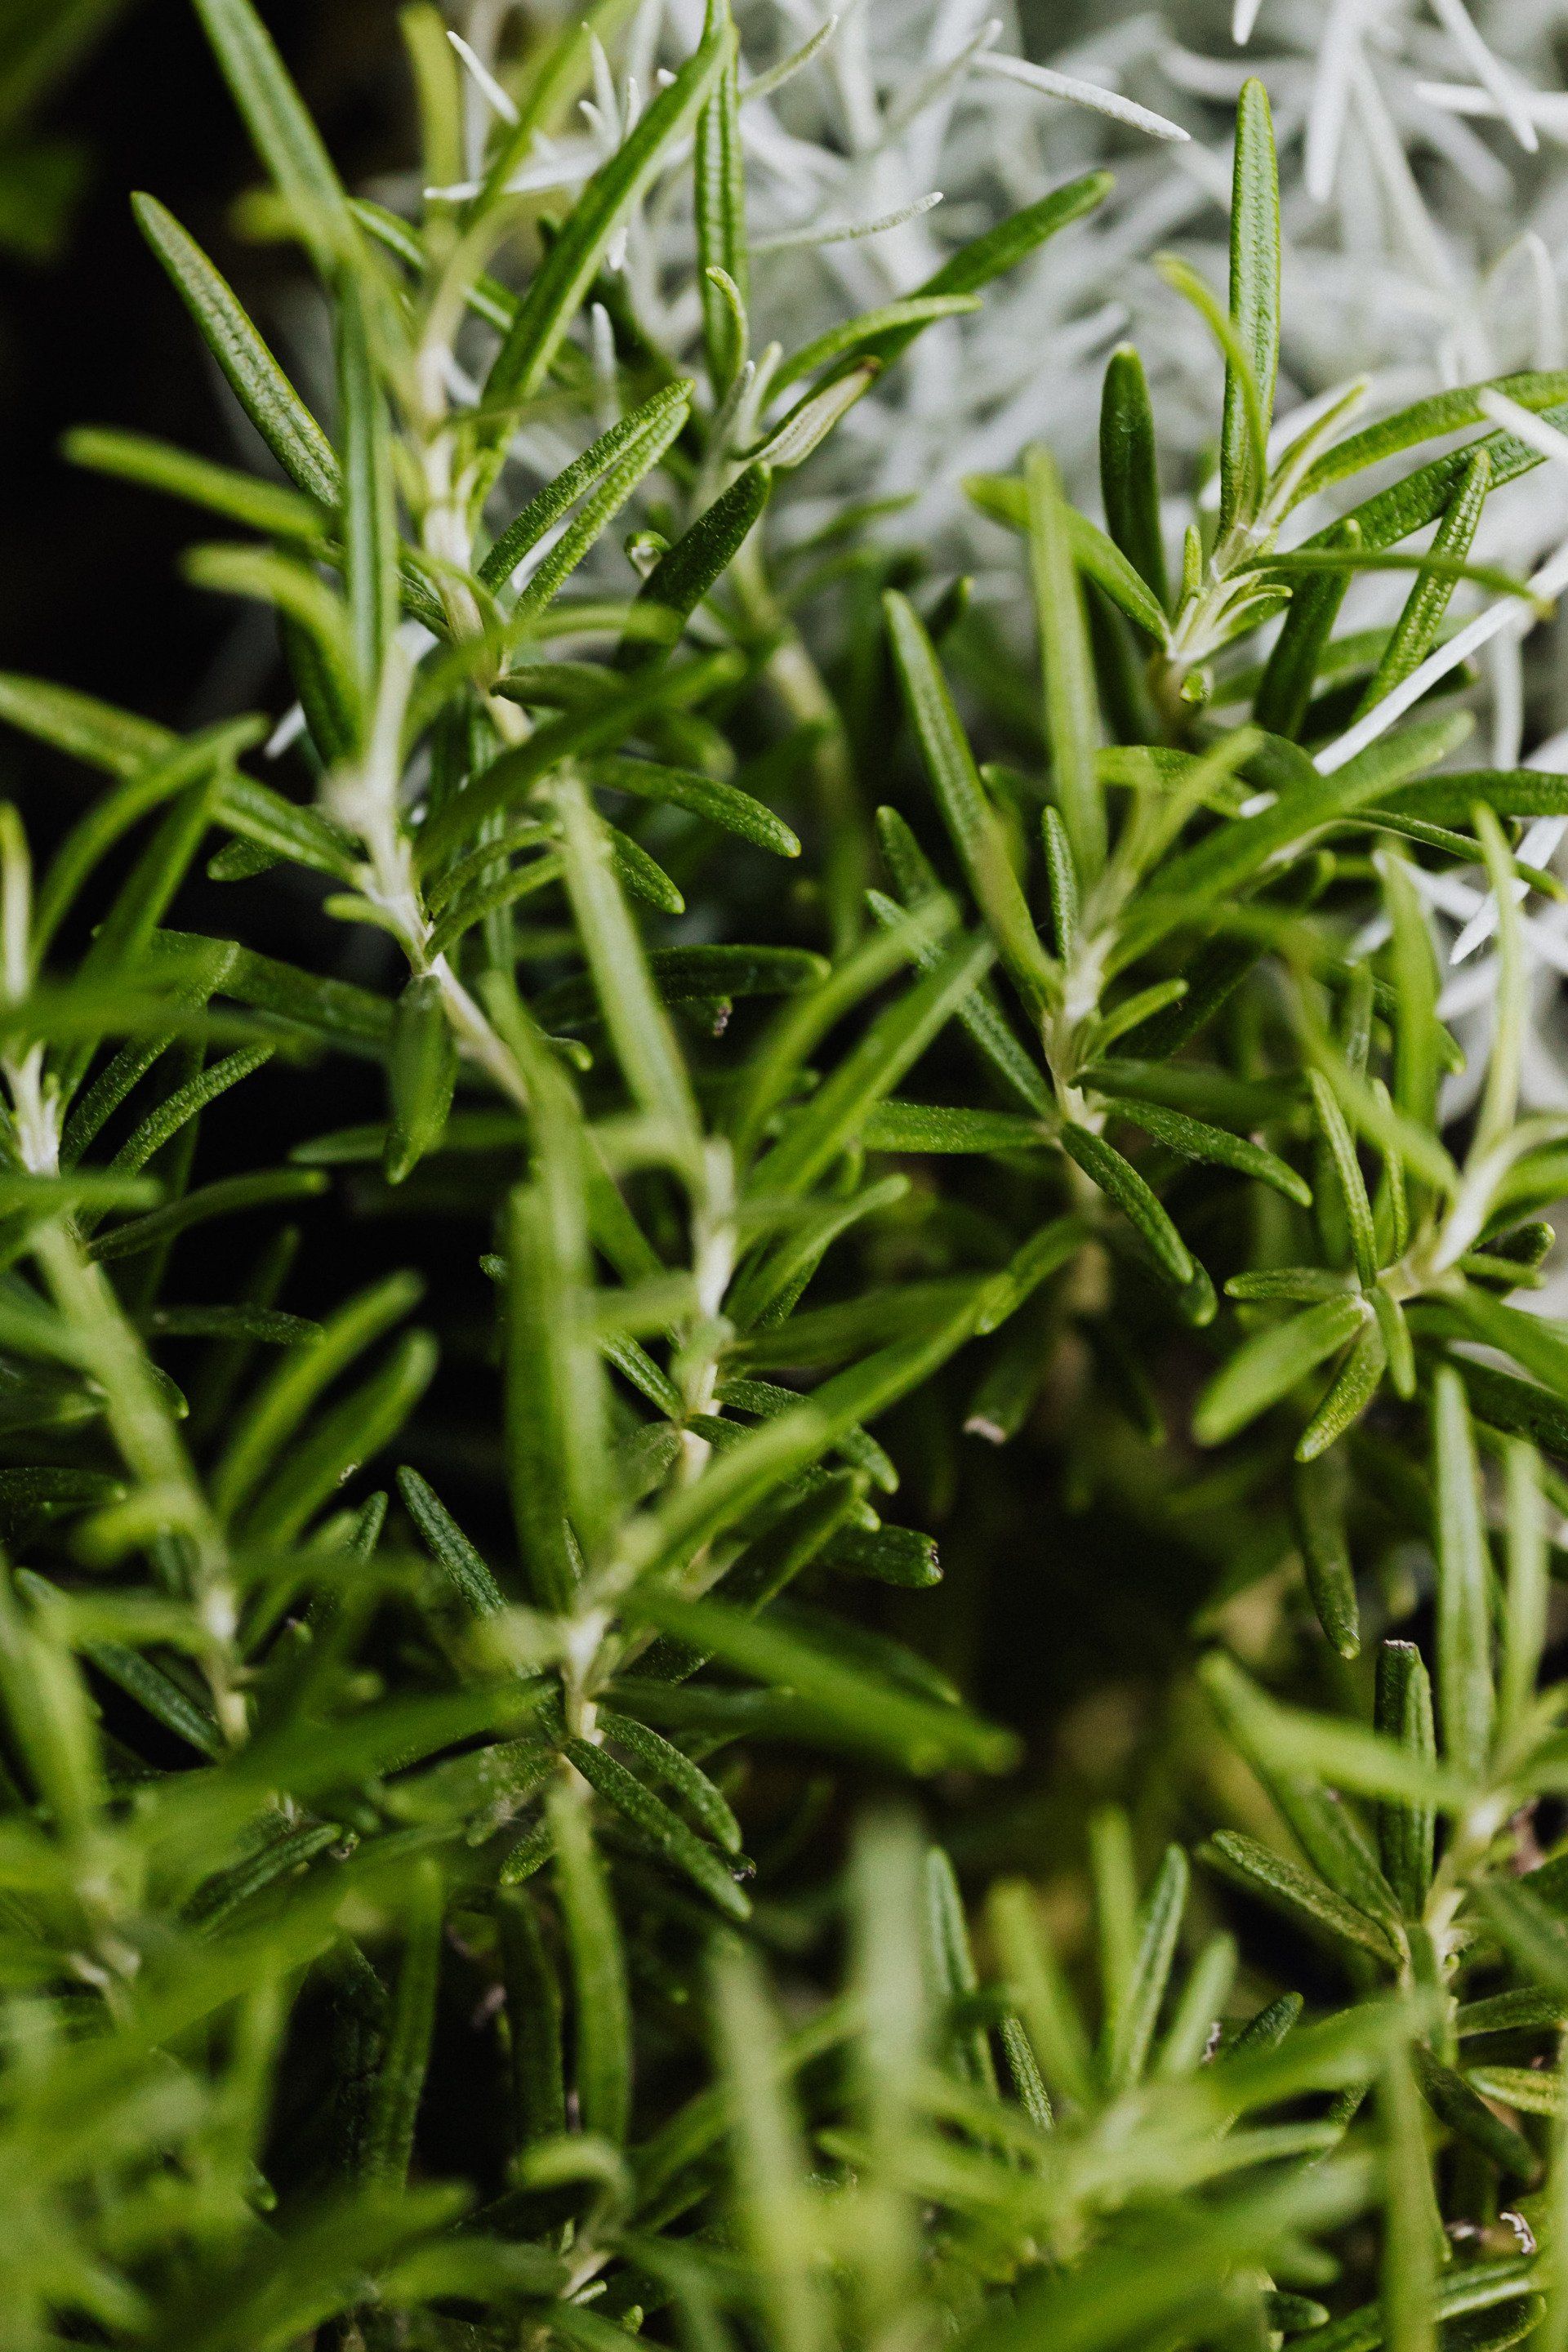 Inflammation, Hair Loss, and the Rosemary Oil Debate